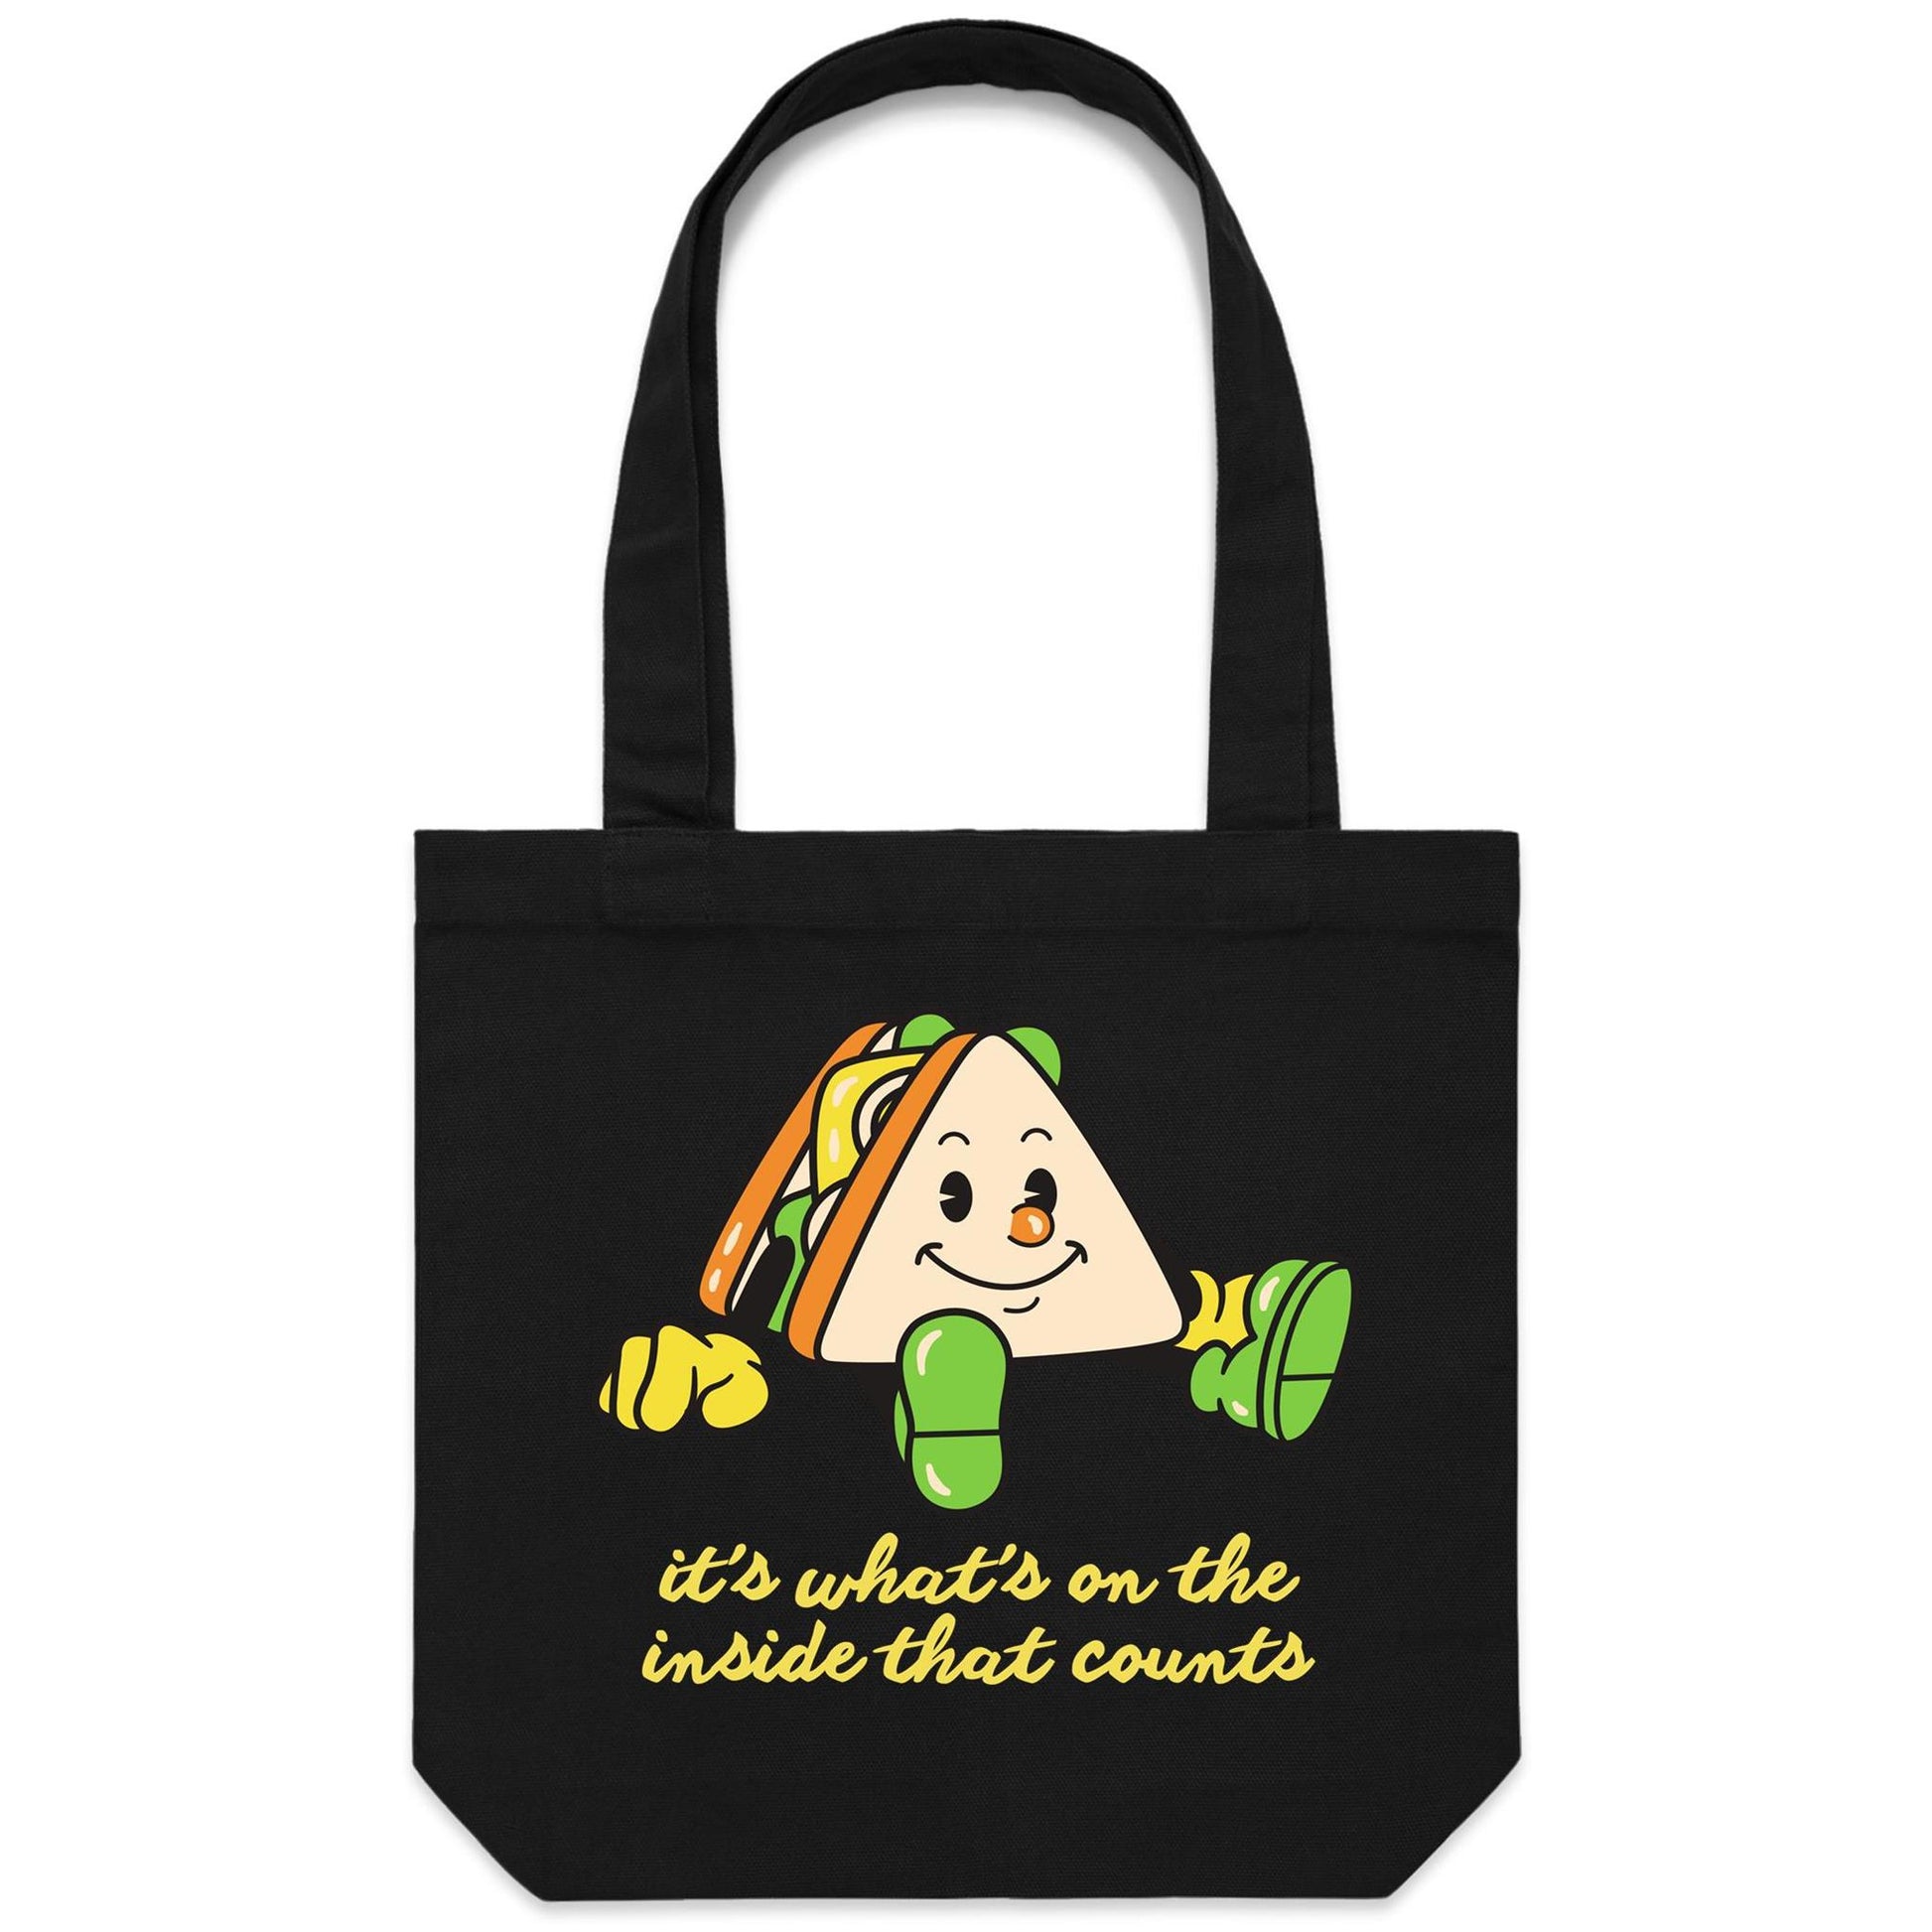 Sandwich, It's What's On The Inside That Counts - Canvas Tote Bag Black One Size Tote Bag Food Motivation